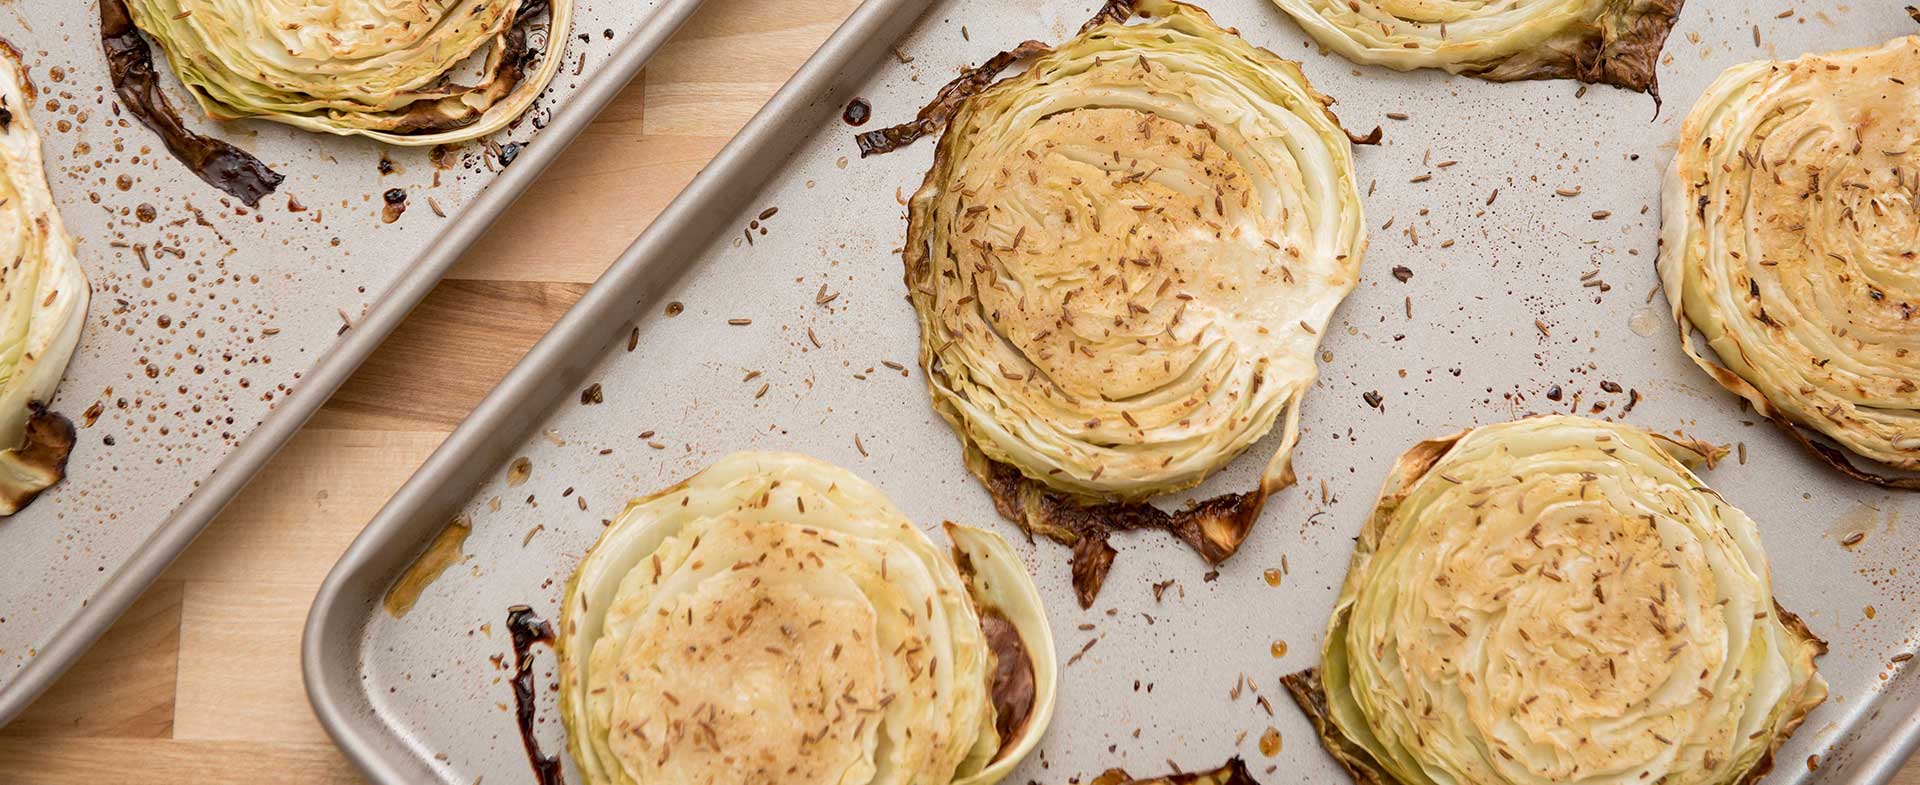 Roasted cabbage steaks recipe video